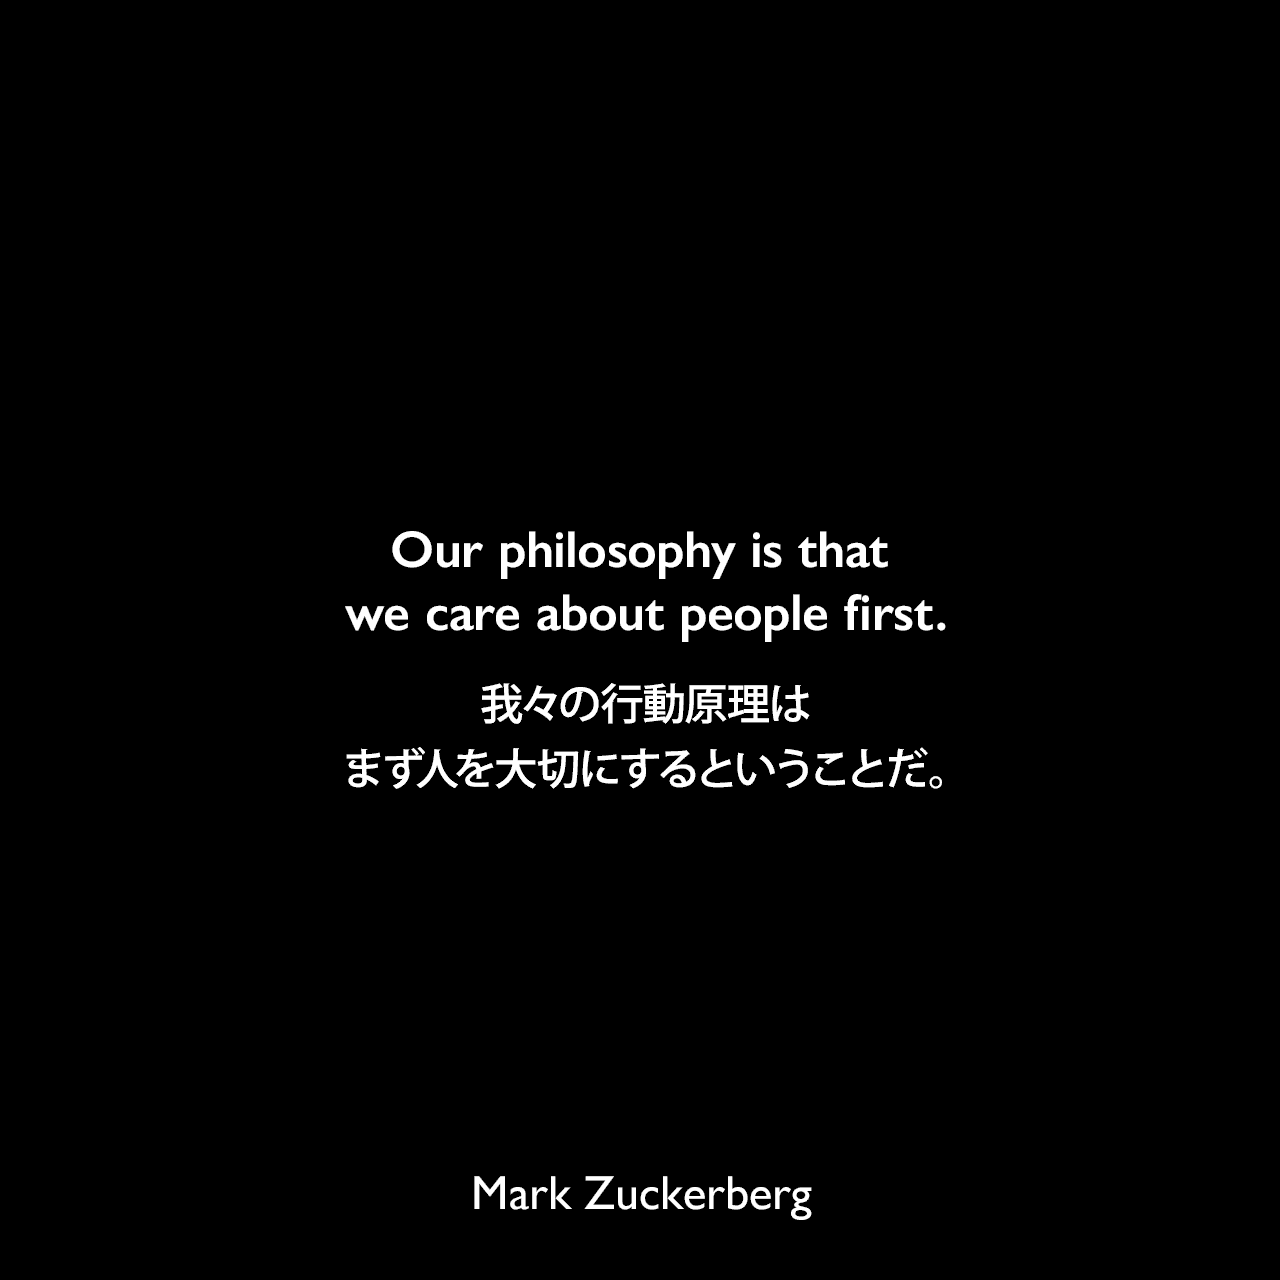 Our philosophy is that we care about people first.我々の行動原理は、まず人を大切にするということだ。Mark Zuckerberg